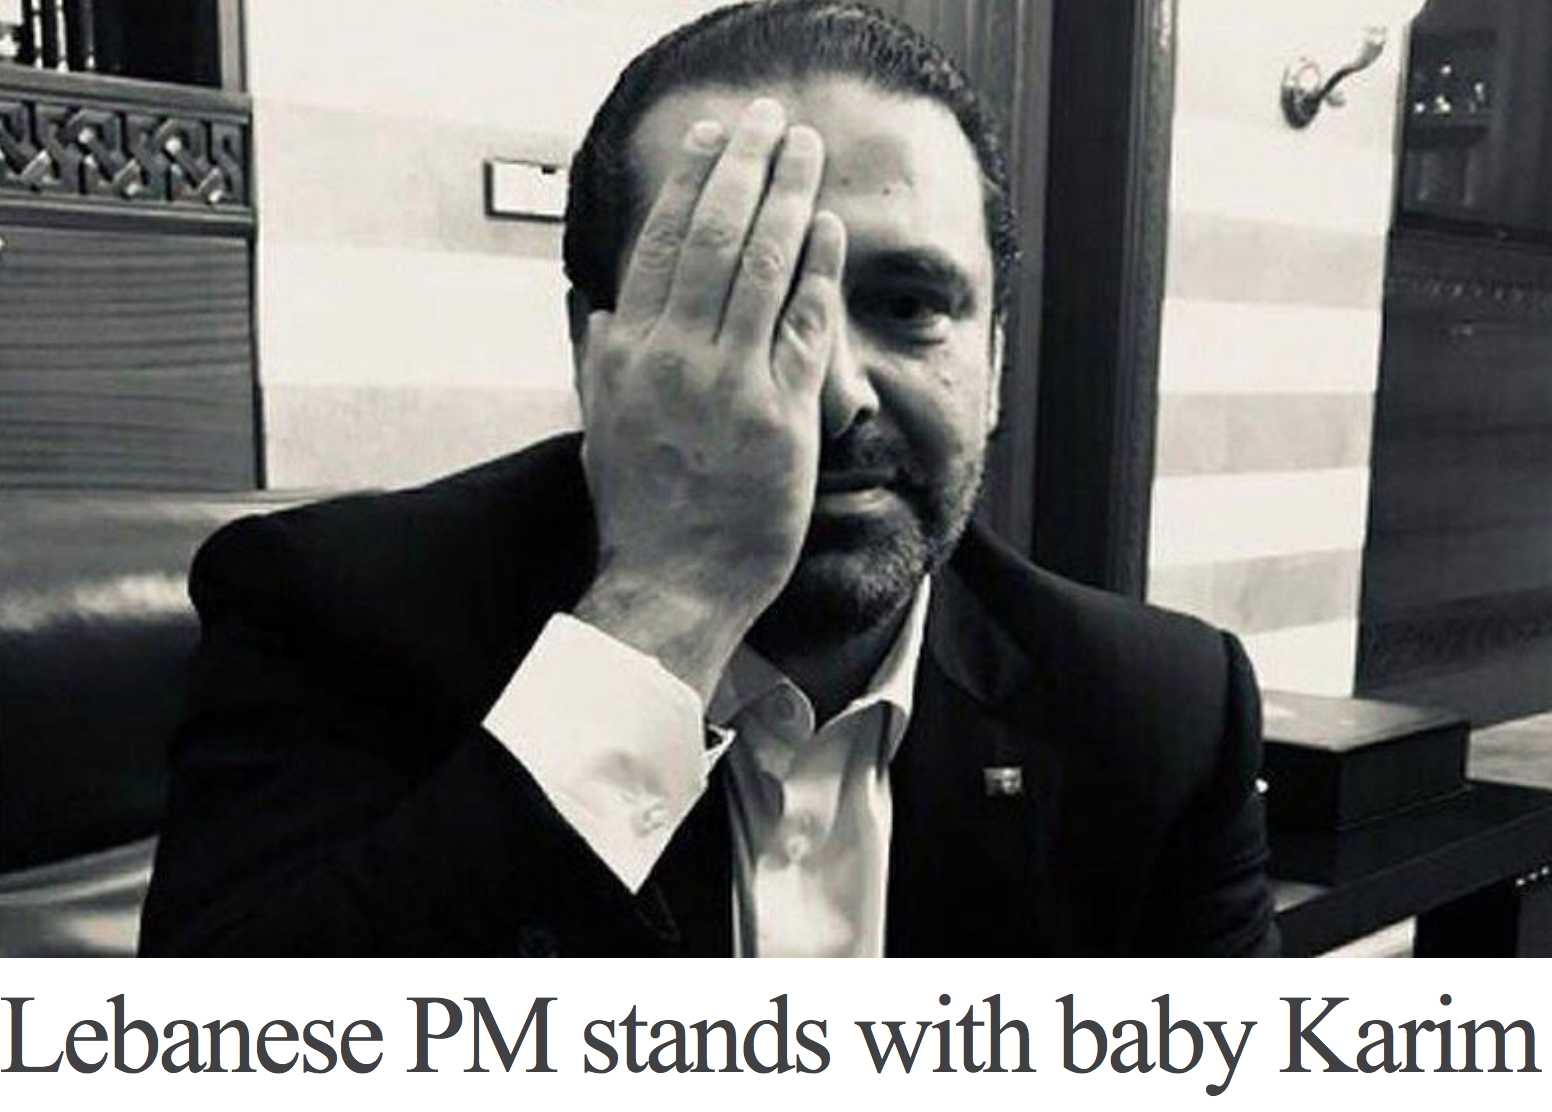 Lebanese prime minister stands with baby Karim